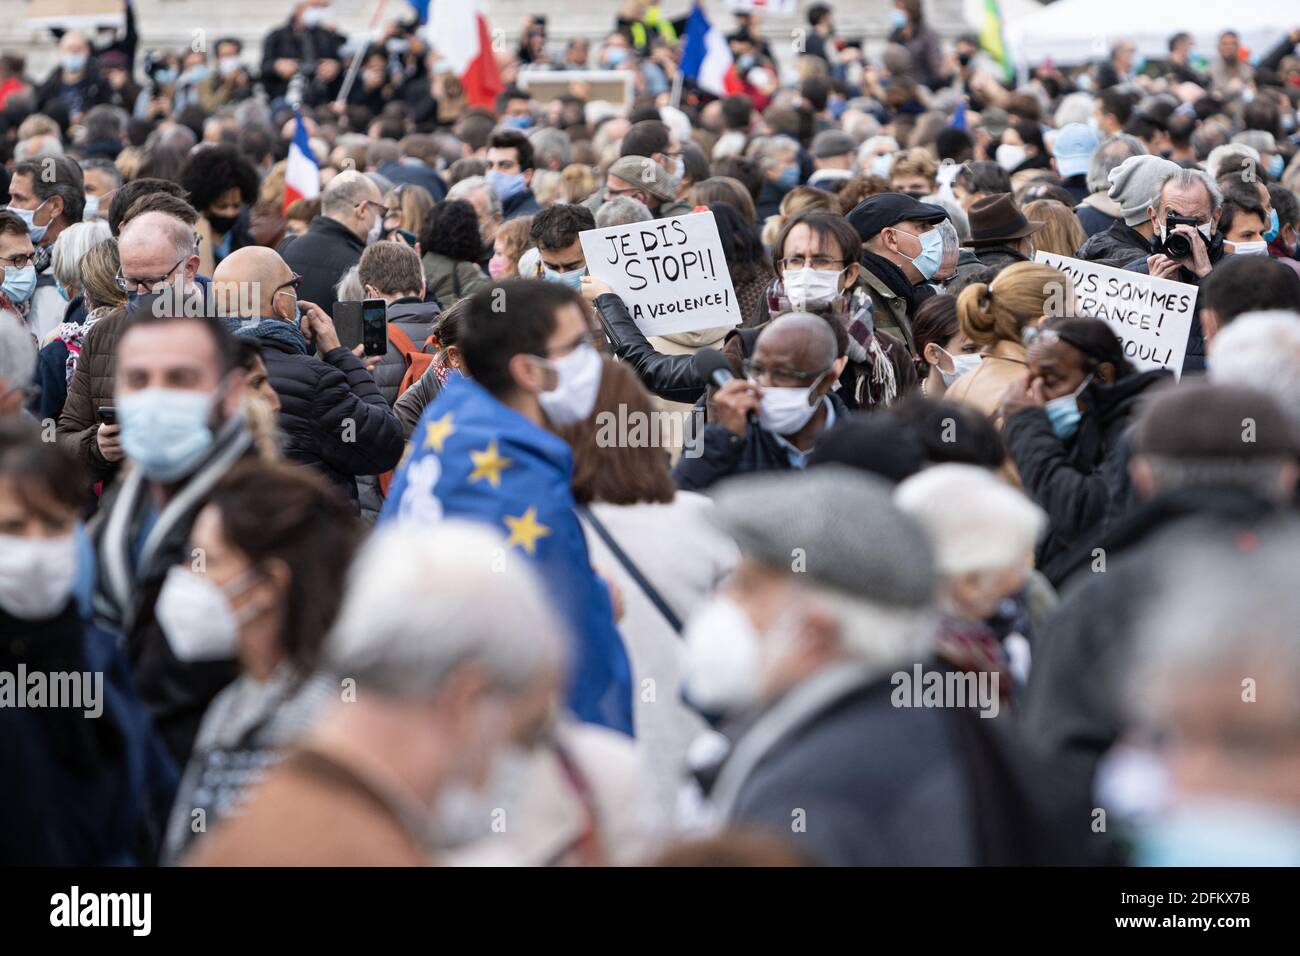 A protester holds a sign saying 'I say stop to violence'. People are demonstrating in Republic Square at the call of Charlie Hebdo and SOS Racism to pay tribute to Professor Samuel Paty, assassinated Friday for showing his students caricatures of Mohammed. Paris, France, October 18, 2020. Photo by Florent Bardos/ABACAPRESS.COM Stock Photo